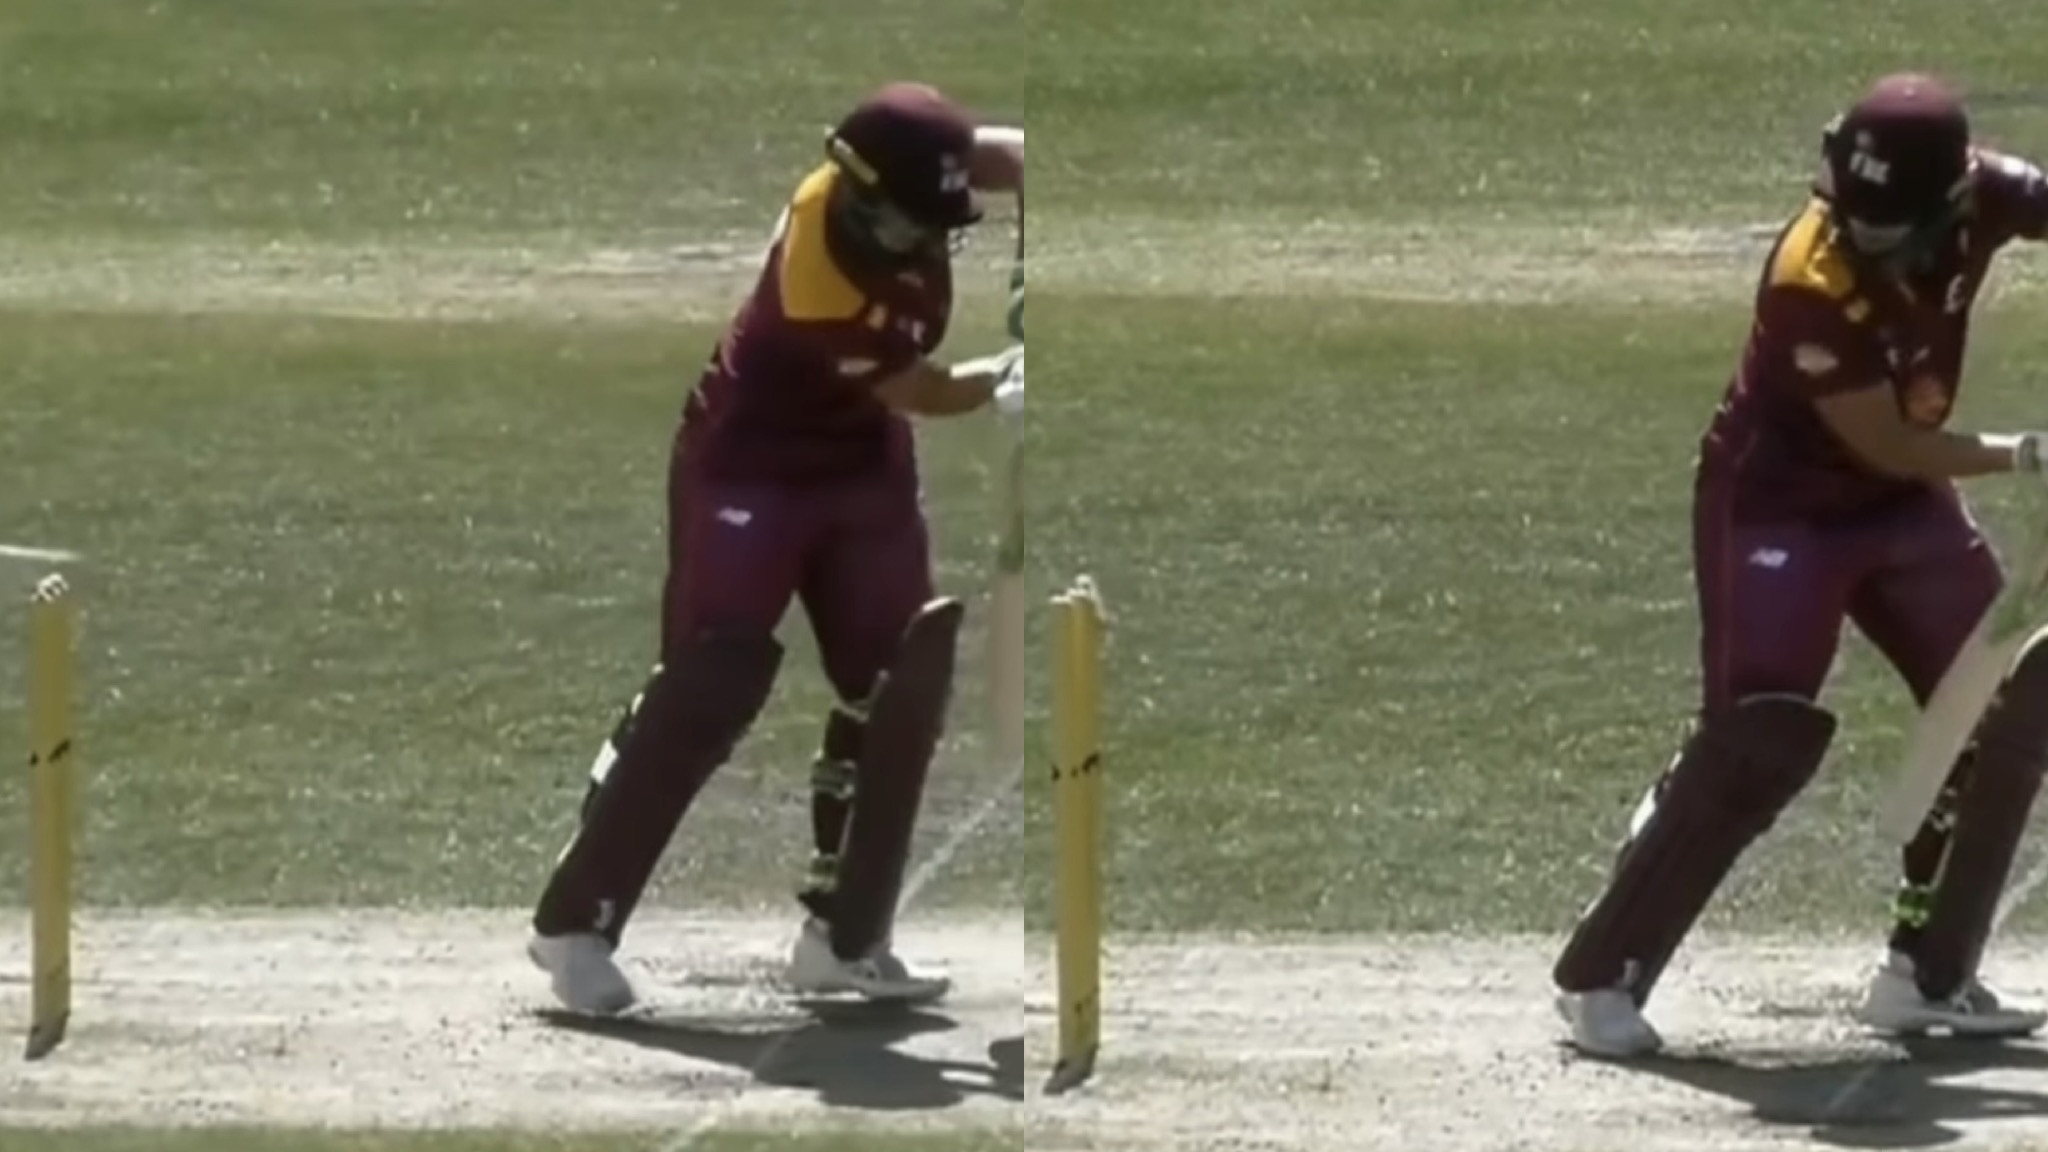 WATCH - Queensland Fire's Georgia Voll gets clean bowled but given not out as no one appealed